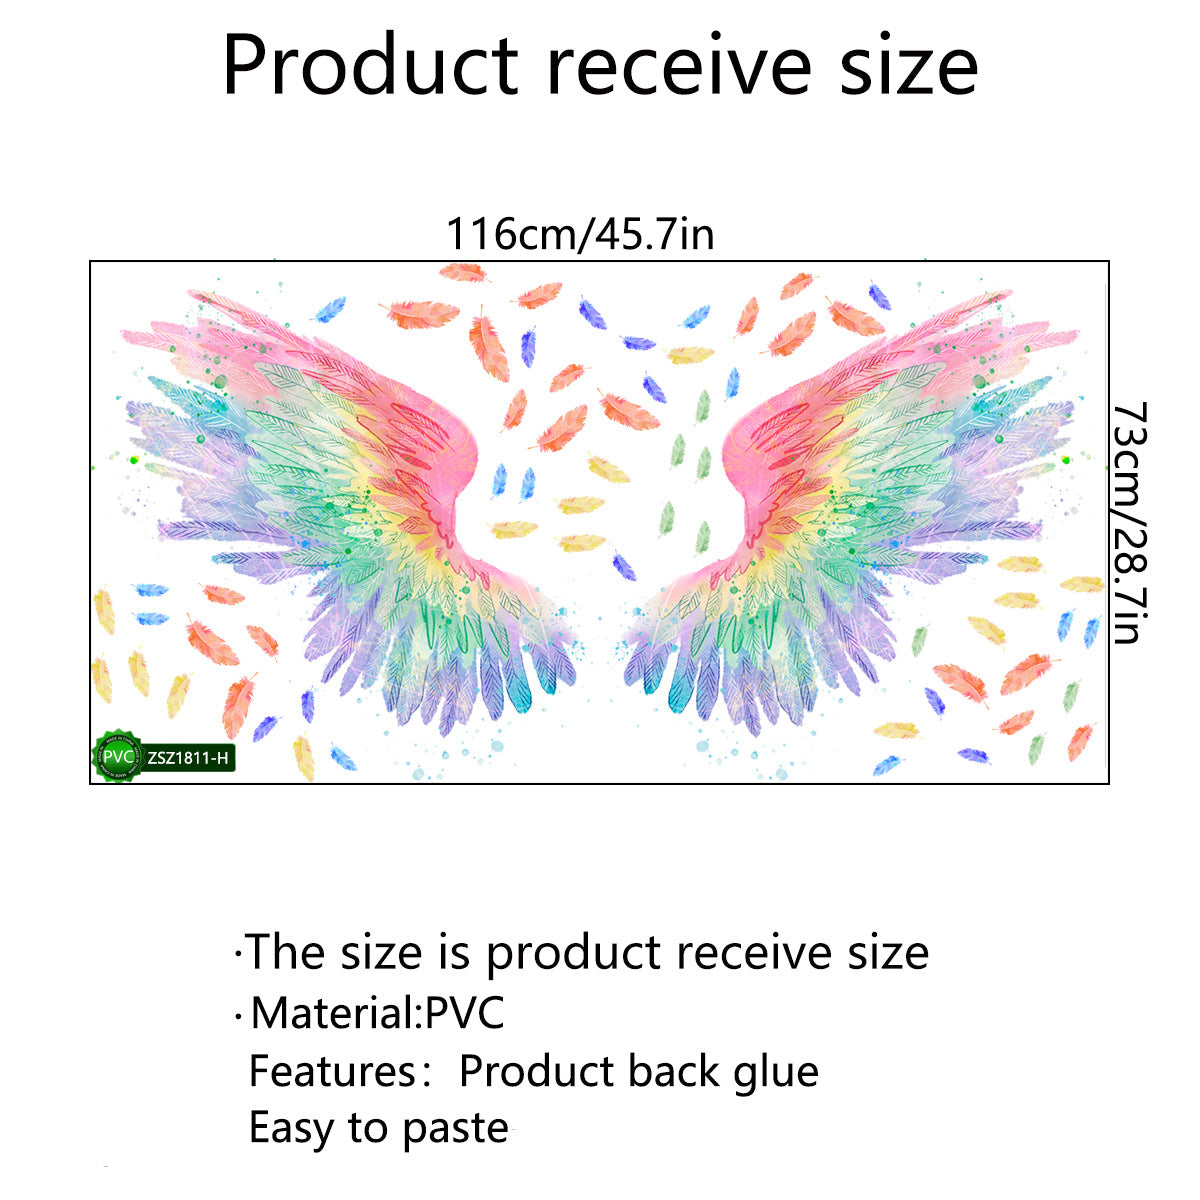 Cartoon Wall Decals Colorful Angel Wings